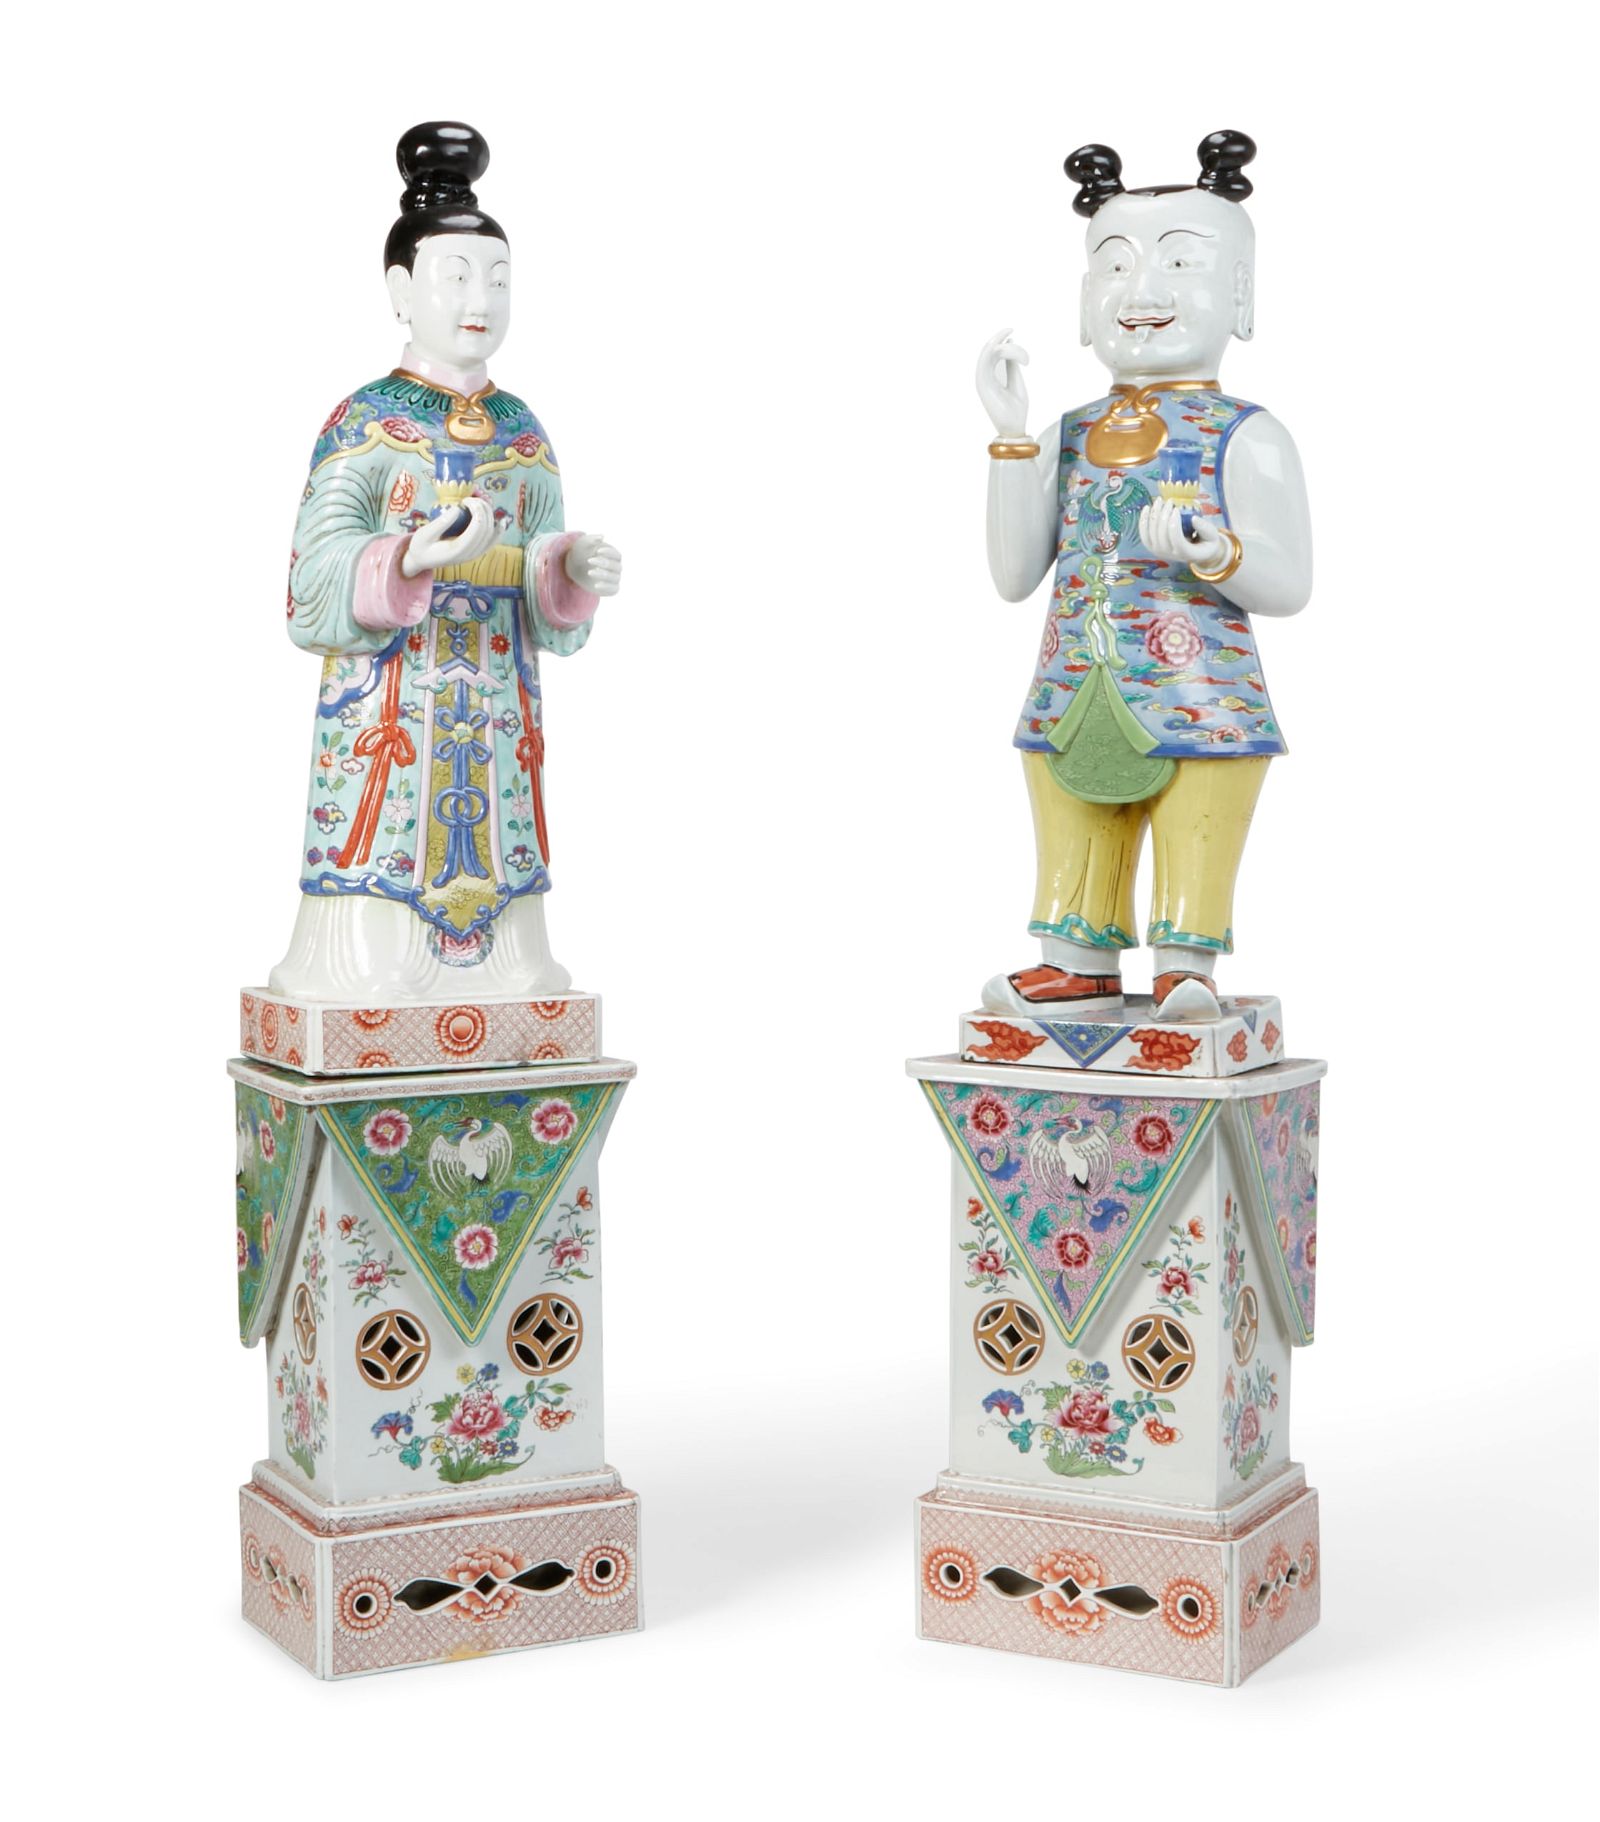 PAIR OF LARGE CHINESE PORCELAIN